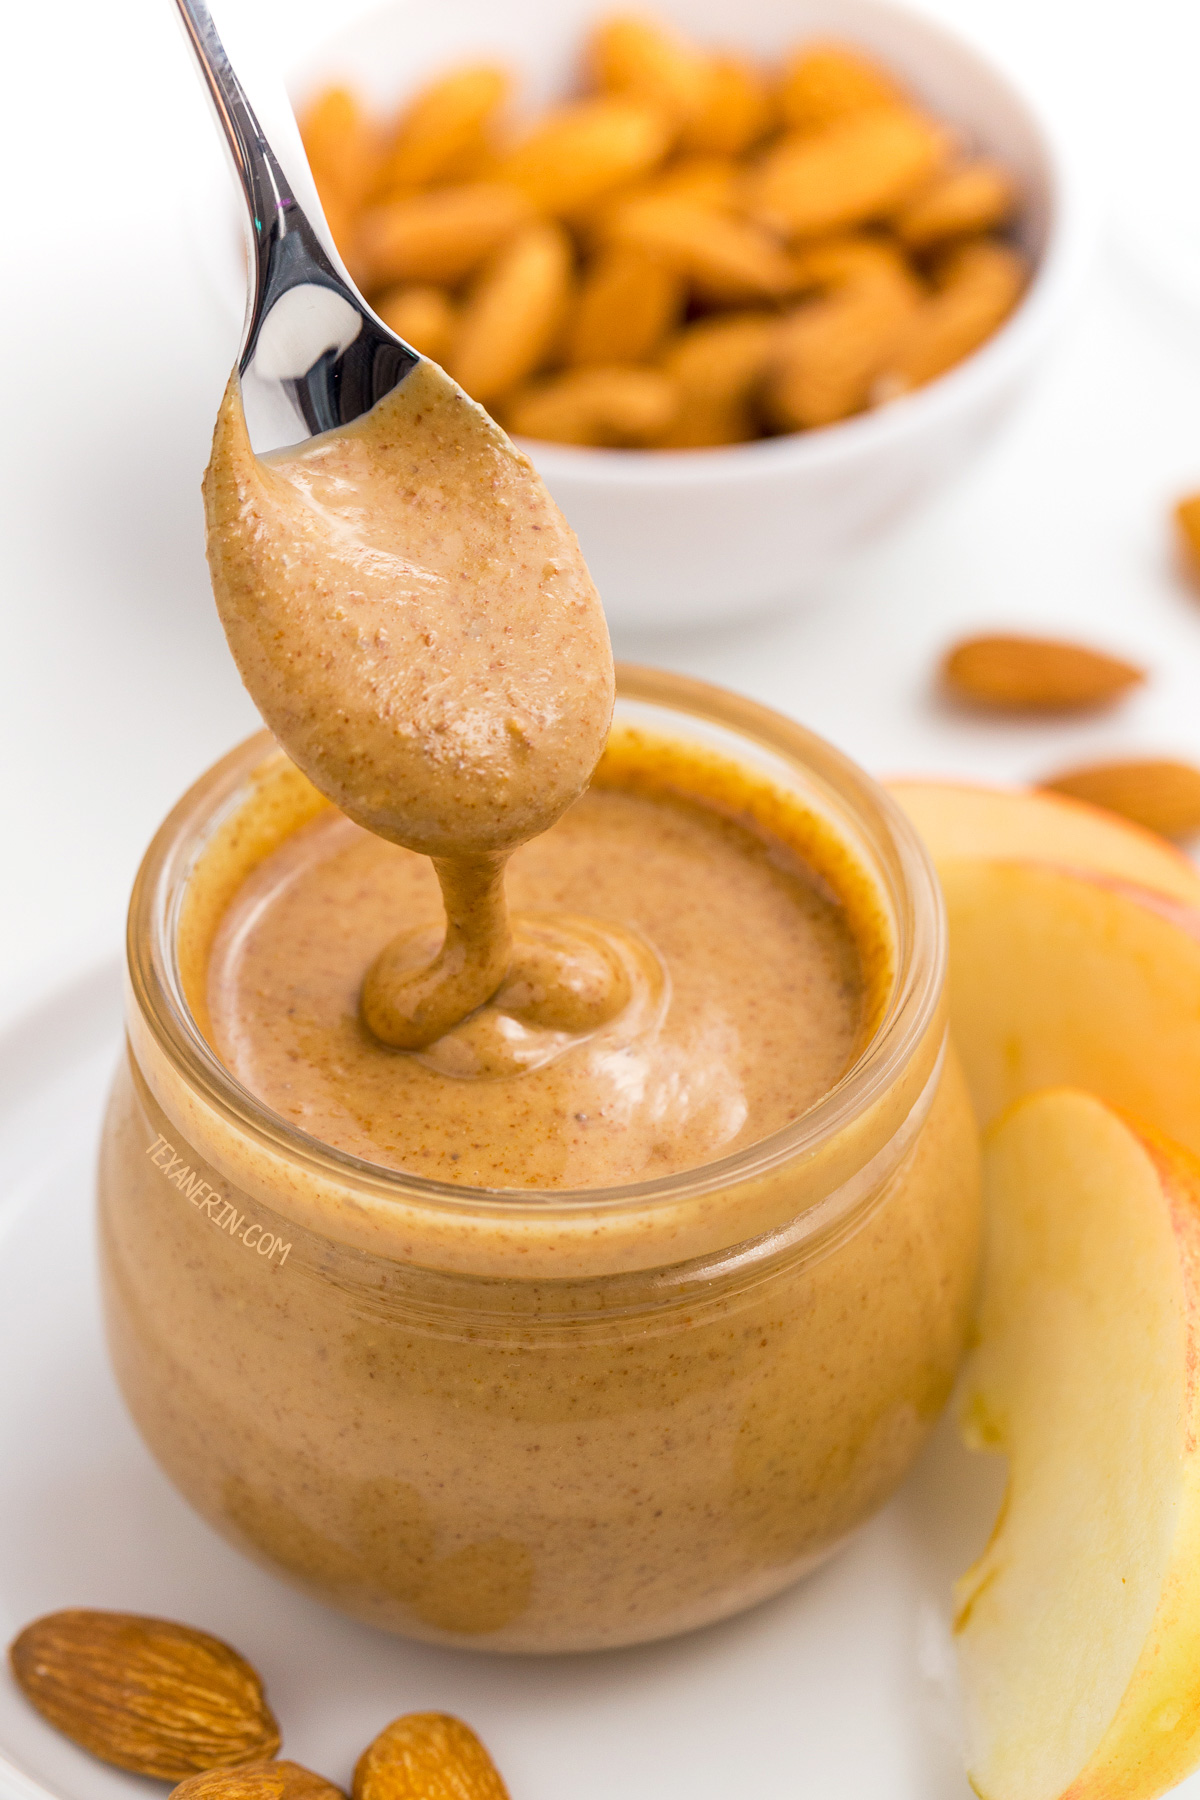 How long is almond butter good for after expiration date How To Make Almond Butter 1 Ingredient No Oil Easy Texanerin Baking